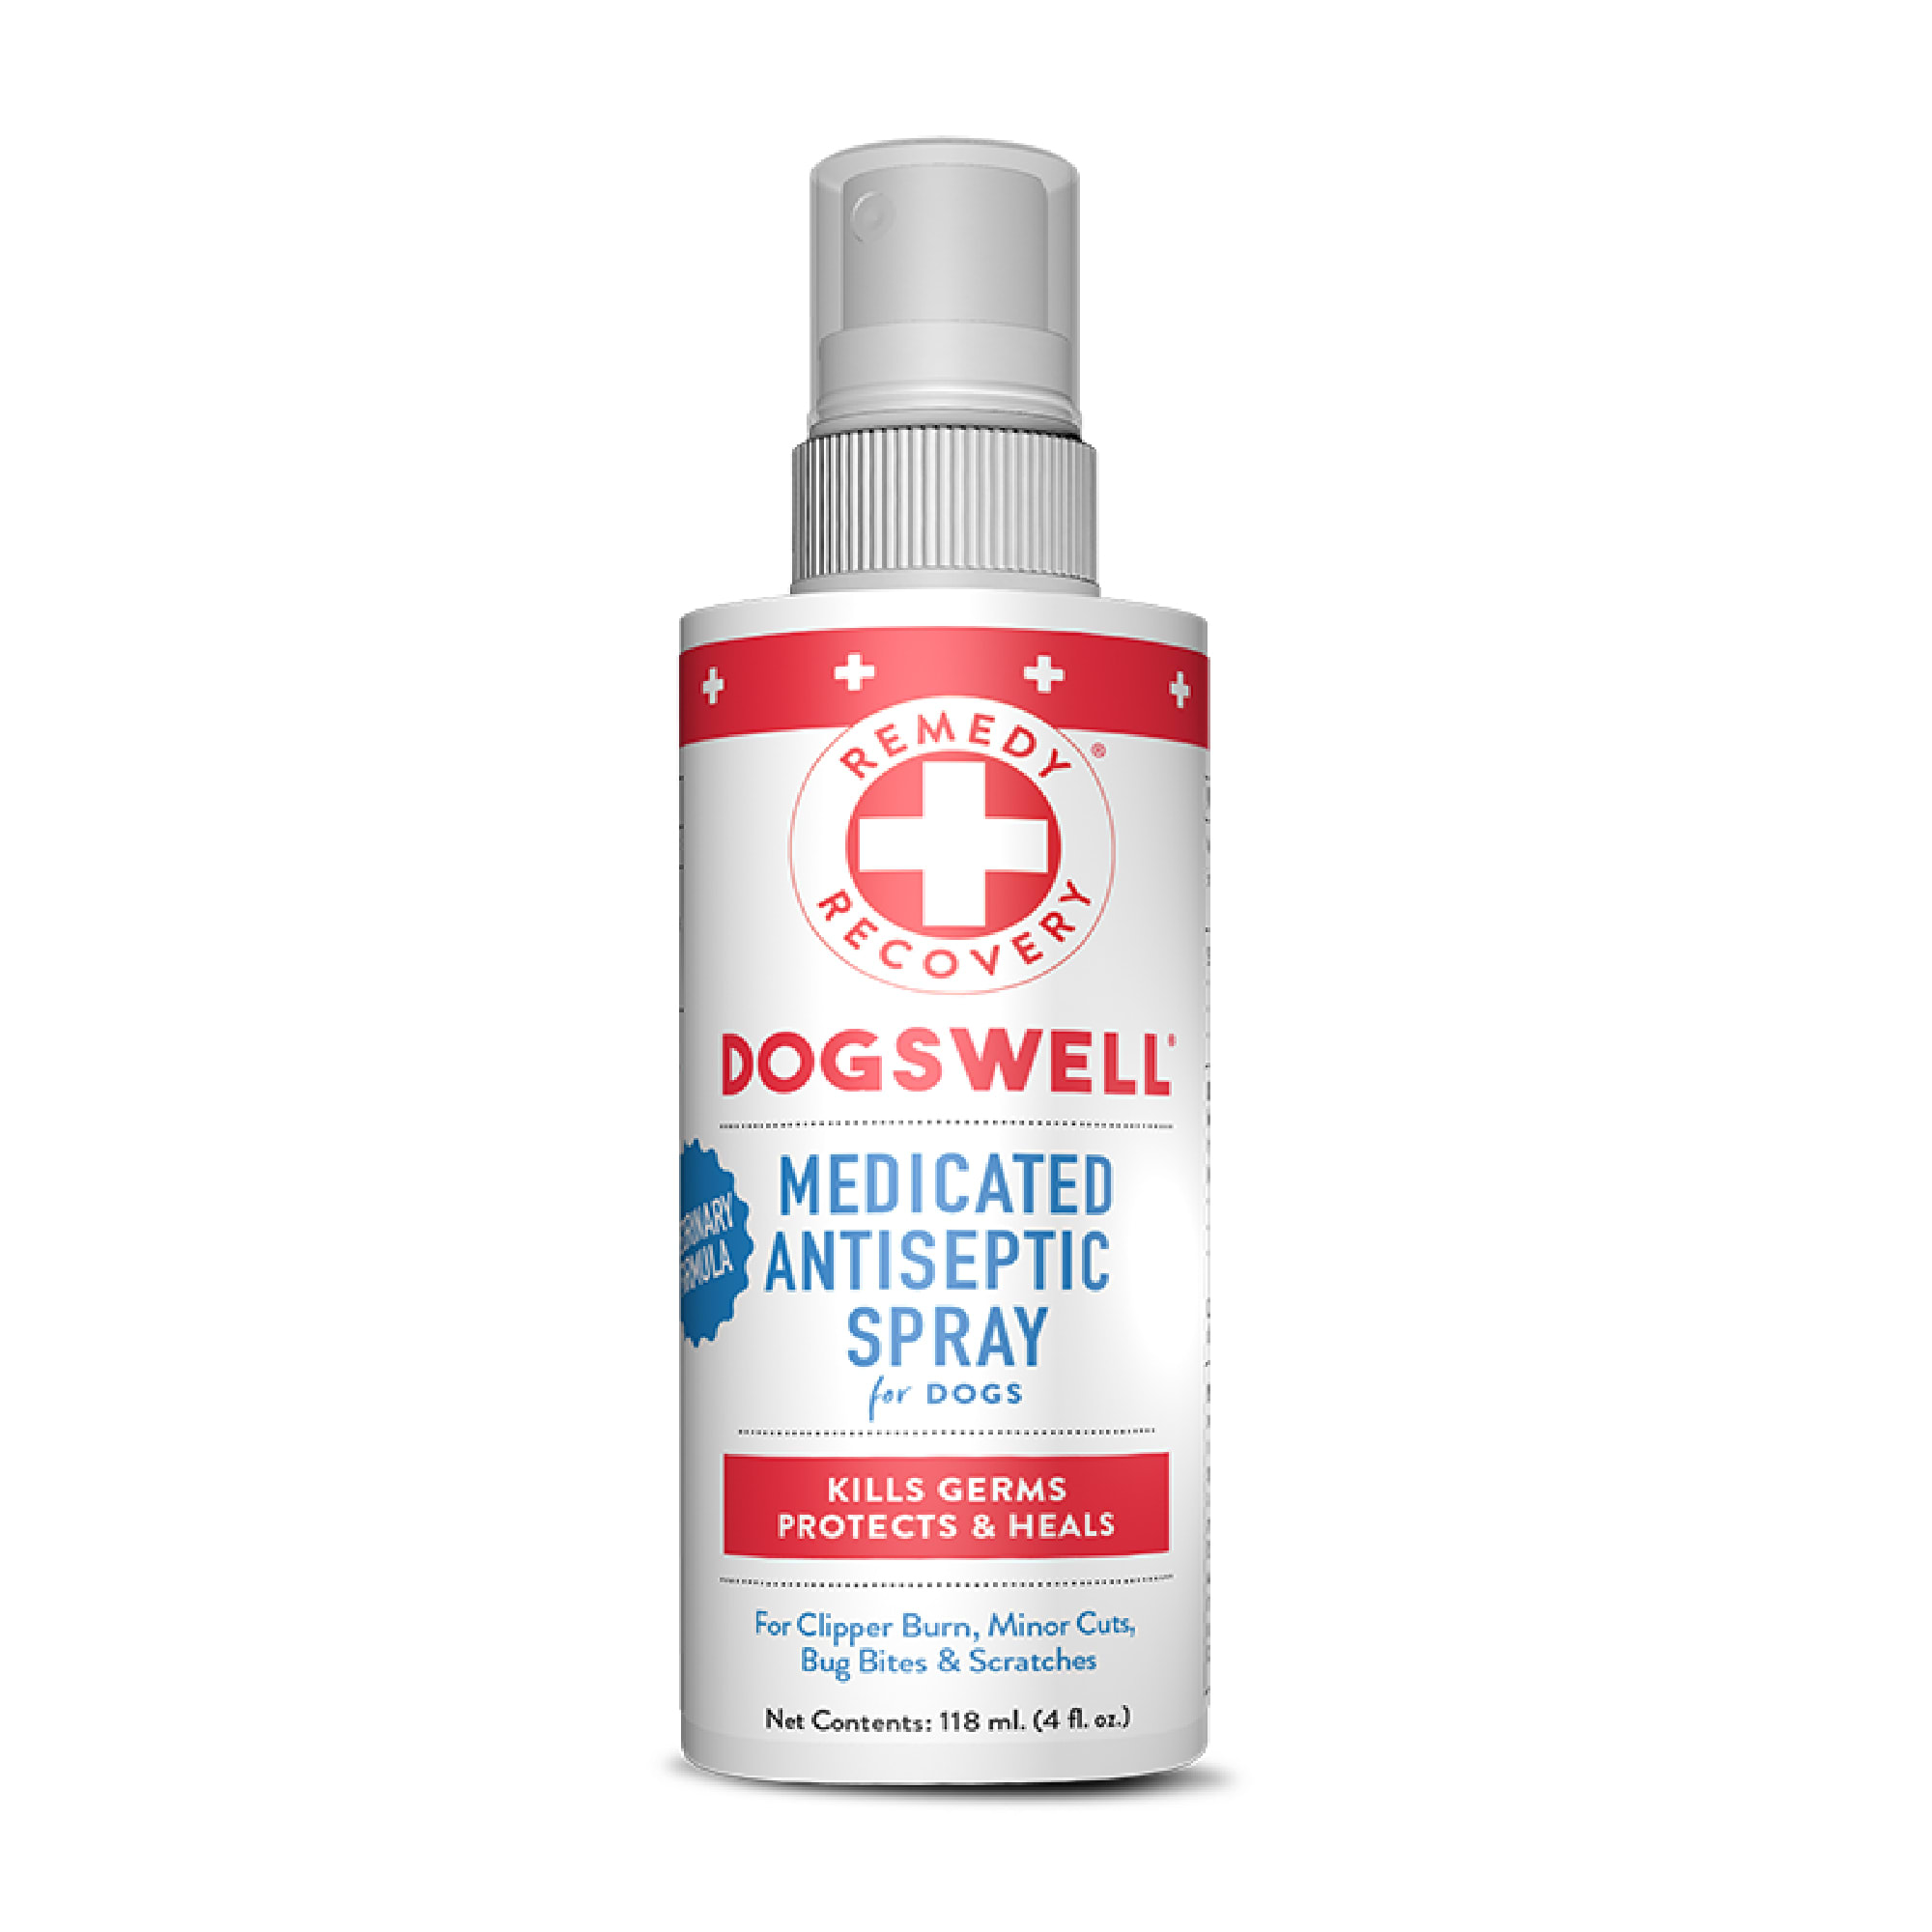 Photos - First Aid Kit Dogswell Remedy+Recovery Medicated Antiseptic Spray for Dogs, 4 f 